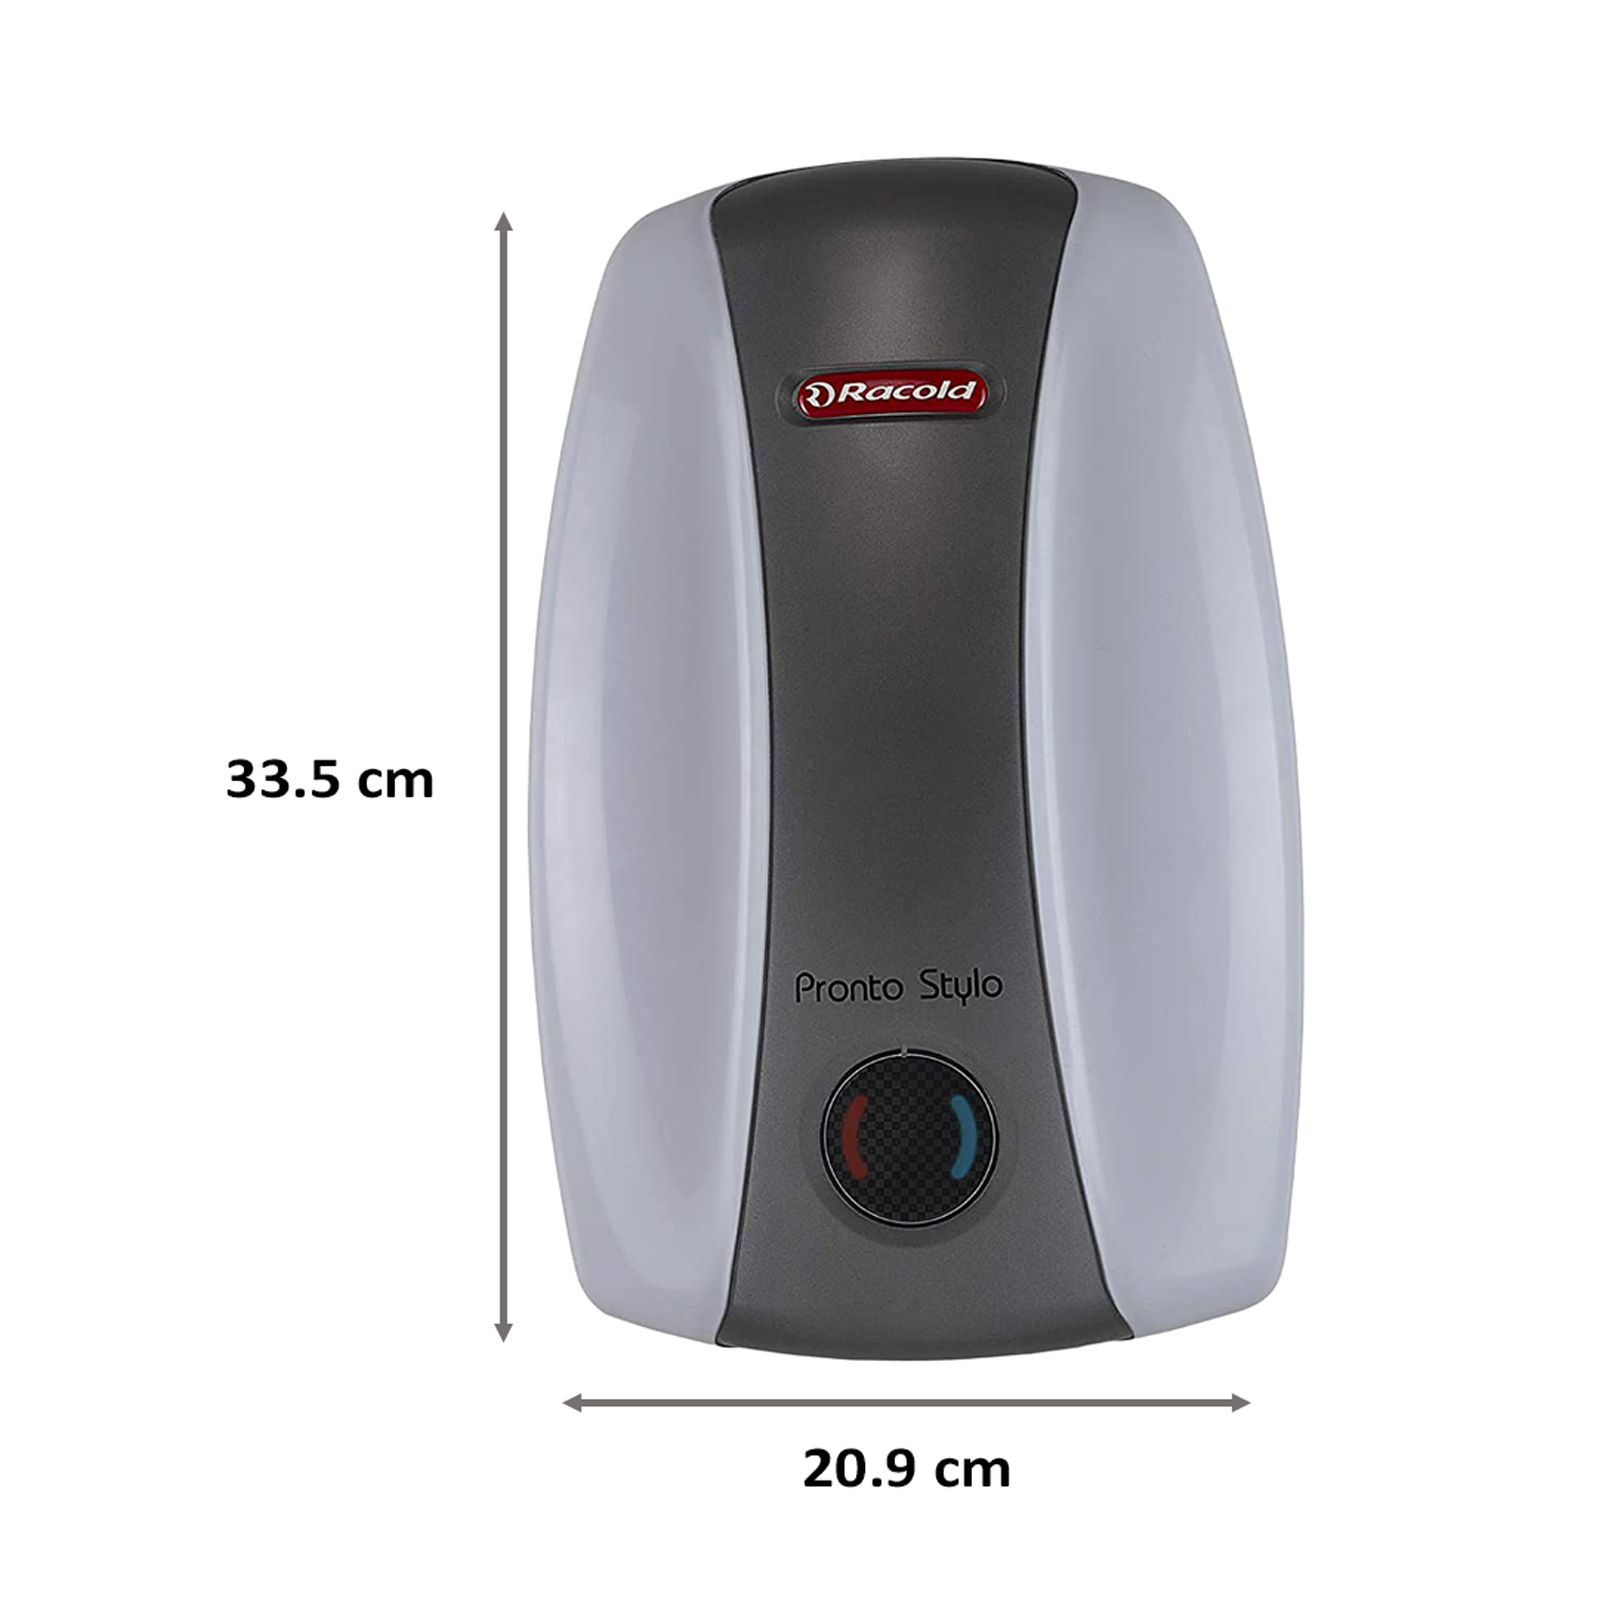 Racold Pronto Stylo 3 Litres Instant Water Geyser (4500 Watts, White)_2